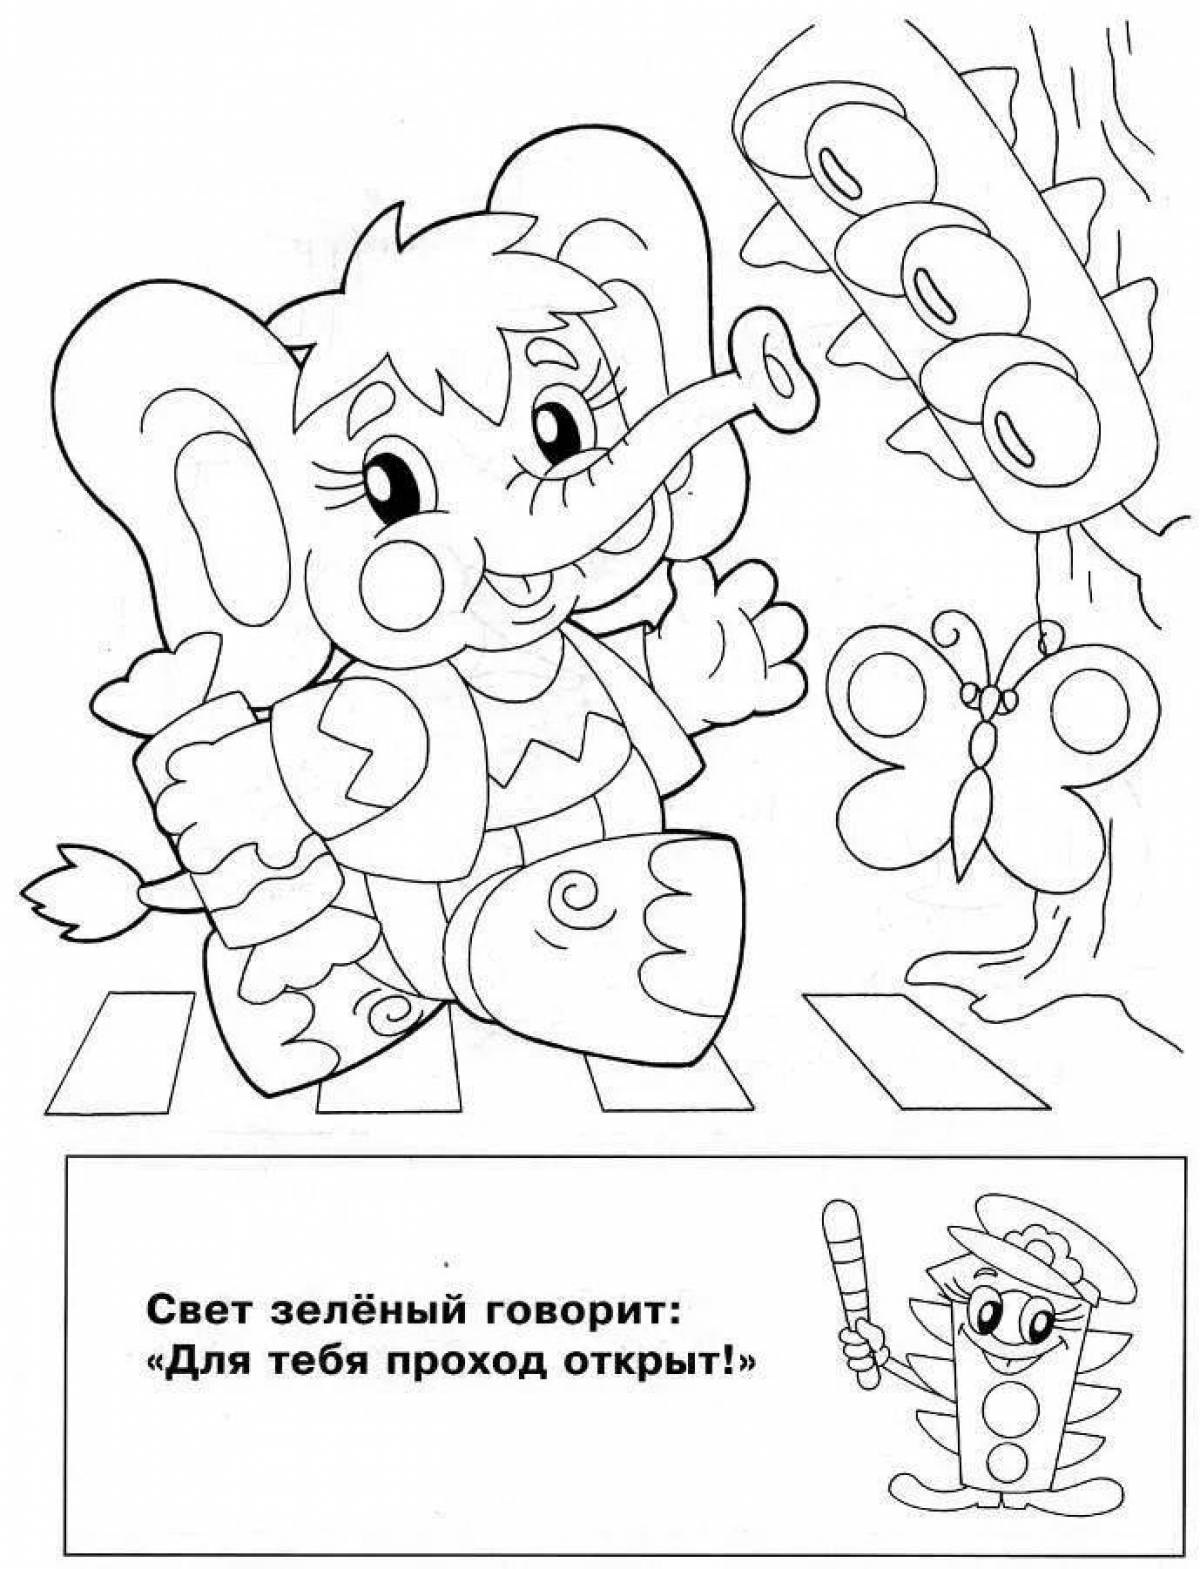 1st grade friendly traffic rules coloring page